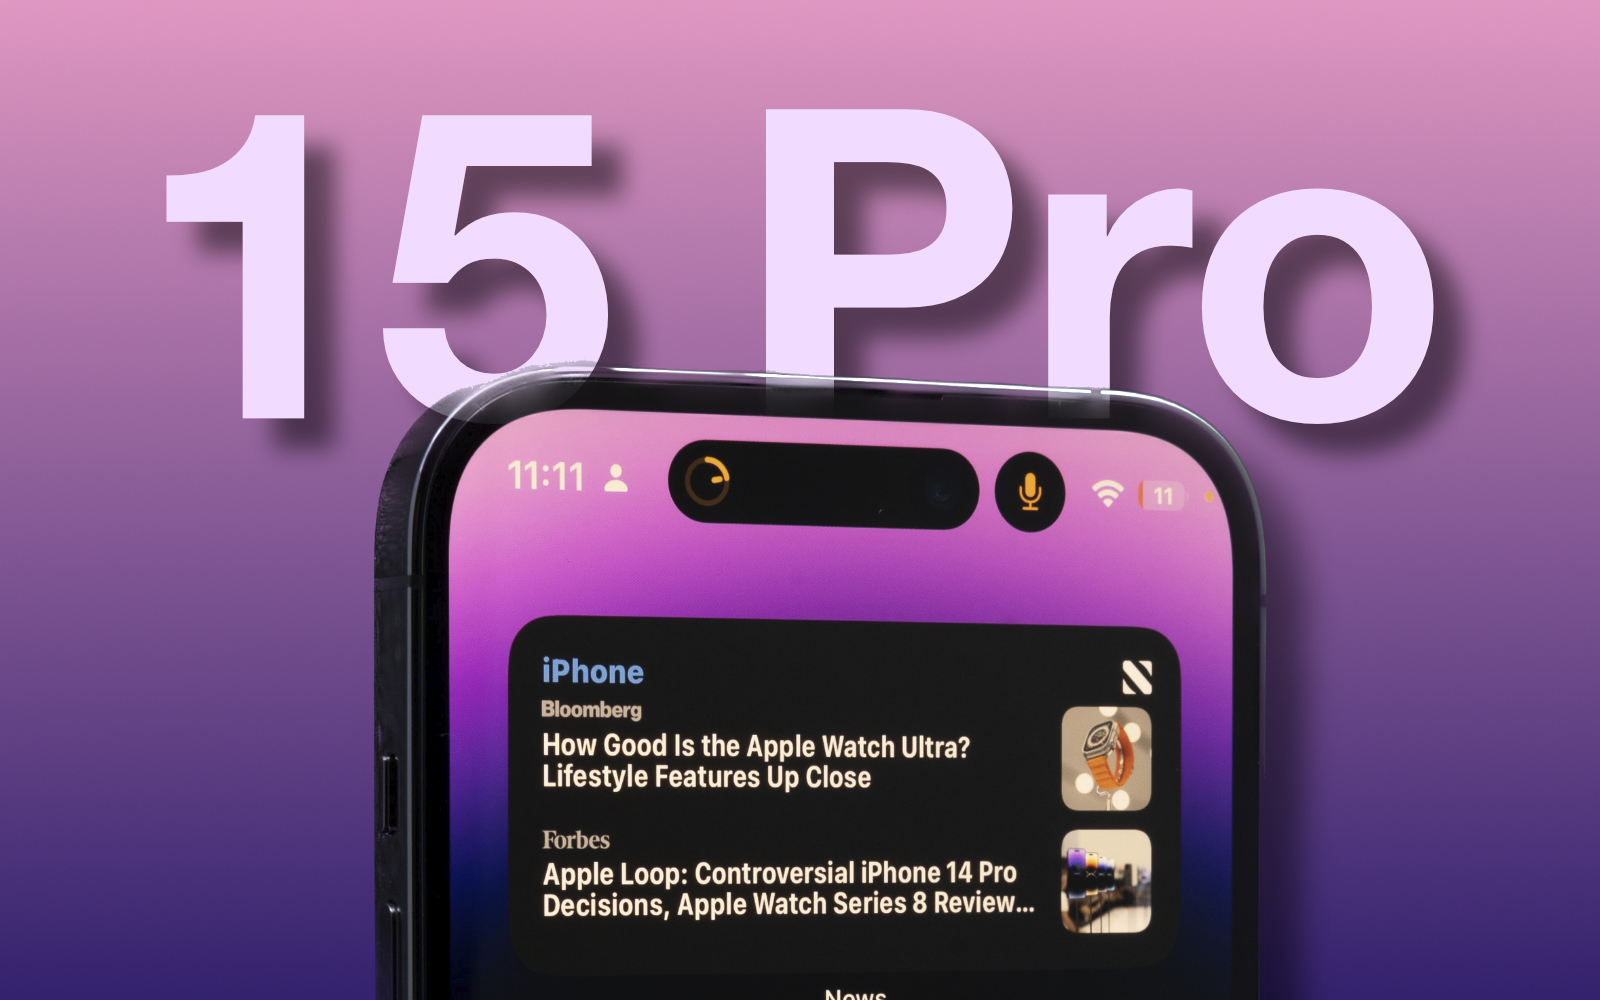 Iphone15pro rumors for 2023